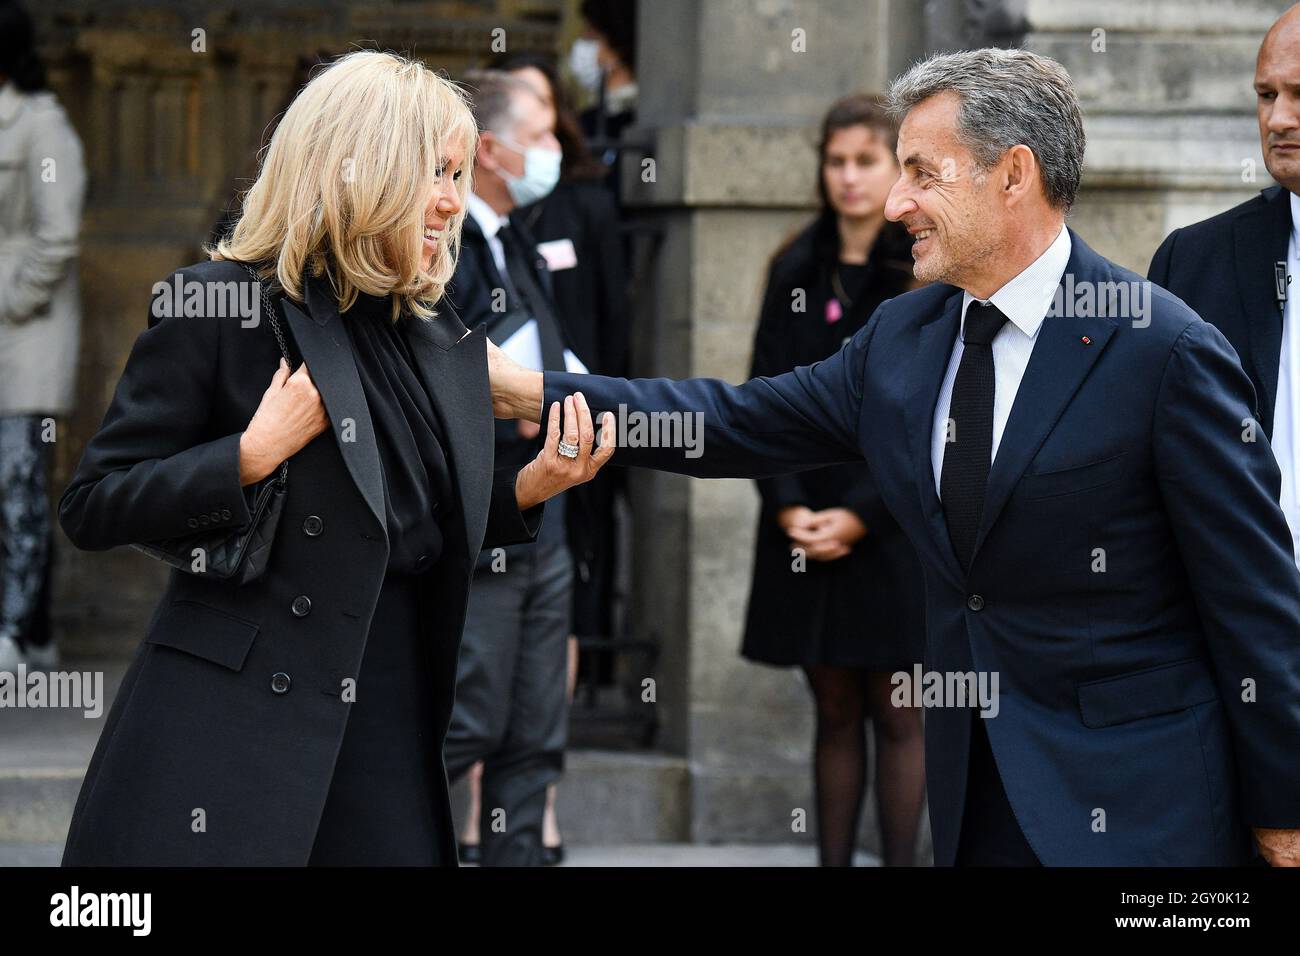 Brigitte Macron and Nicolas Sarkozy during a tribute mass for French tycoon Bernard  Tapie at Saint Germain des Pres church in Paris, France on October 6, 2021.  The funeral will be held